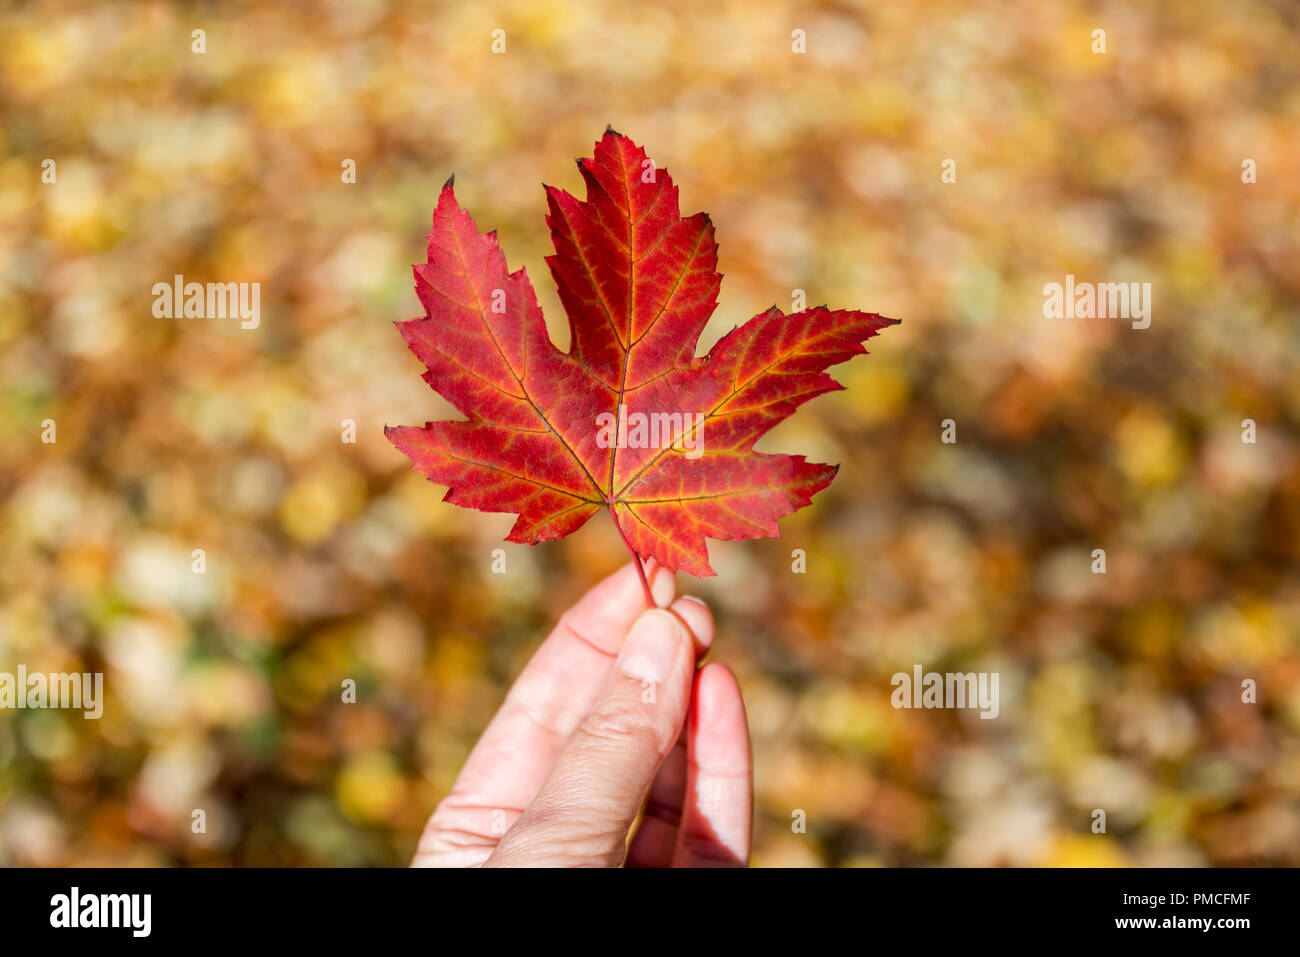 Hand holding a red autumnal maple leaf, blurred forest background Stock Photo